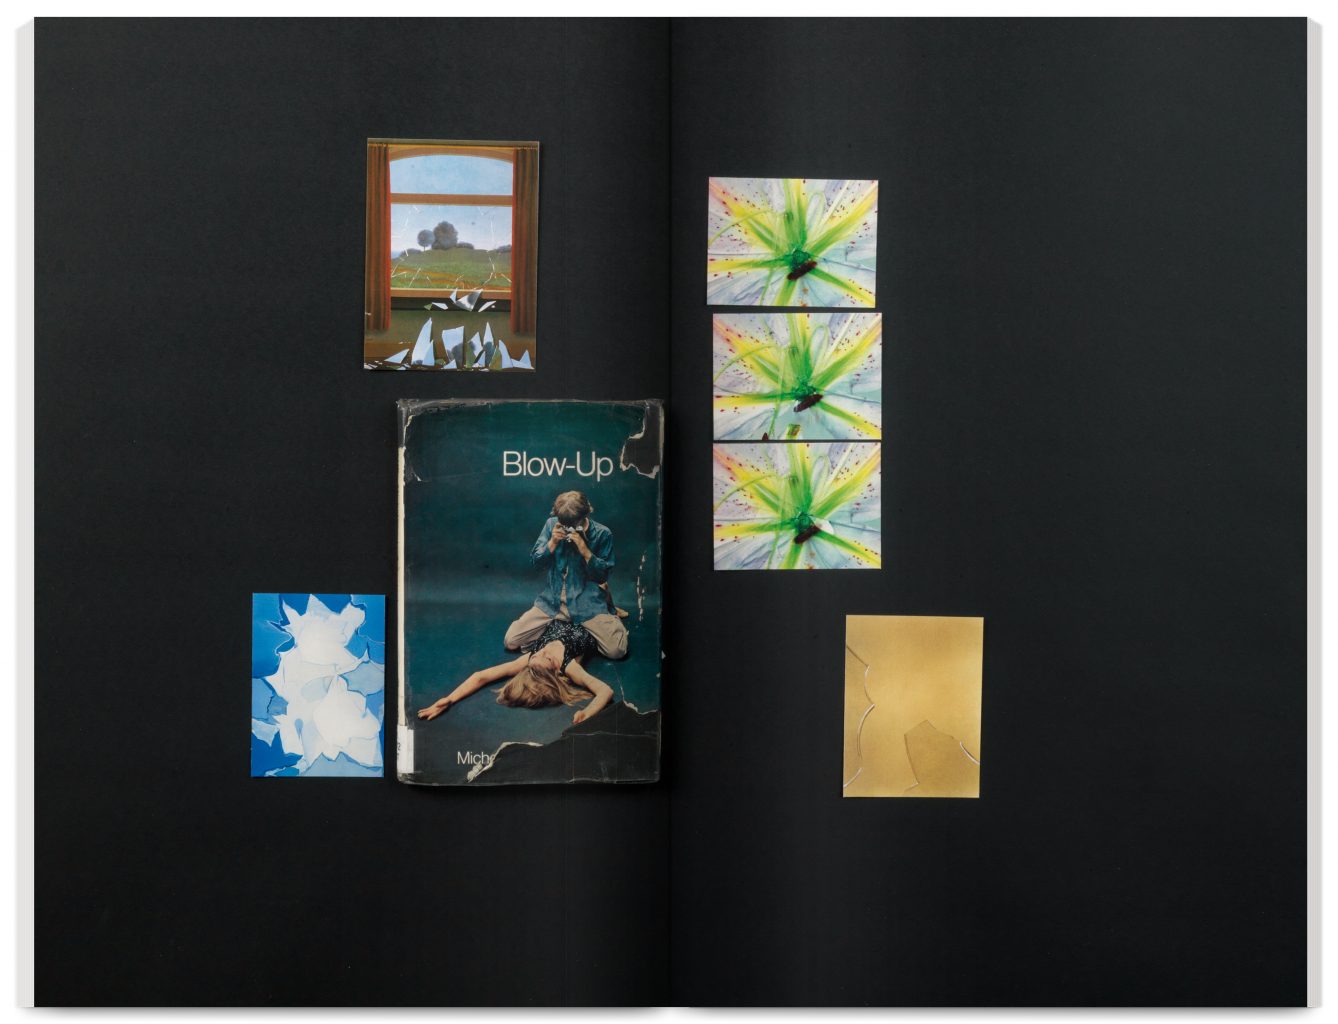 John Smith | Solo Show, catalogue published by the Curating Contemporary Art Department of the Royal College of Art, designed by In the shade of a tree studio (founded by Sophie Demay and Maël Fournier Comte) together with Samuel Bonnet.